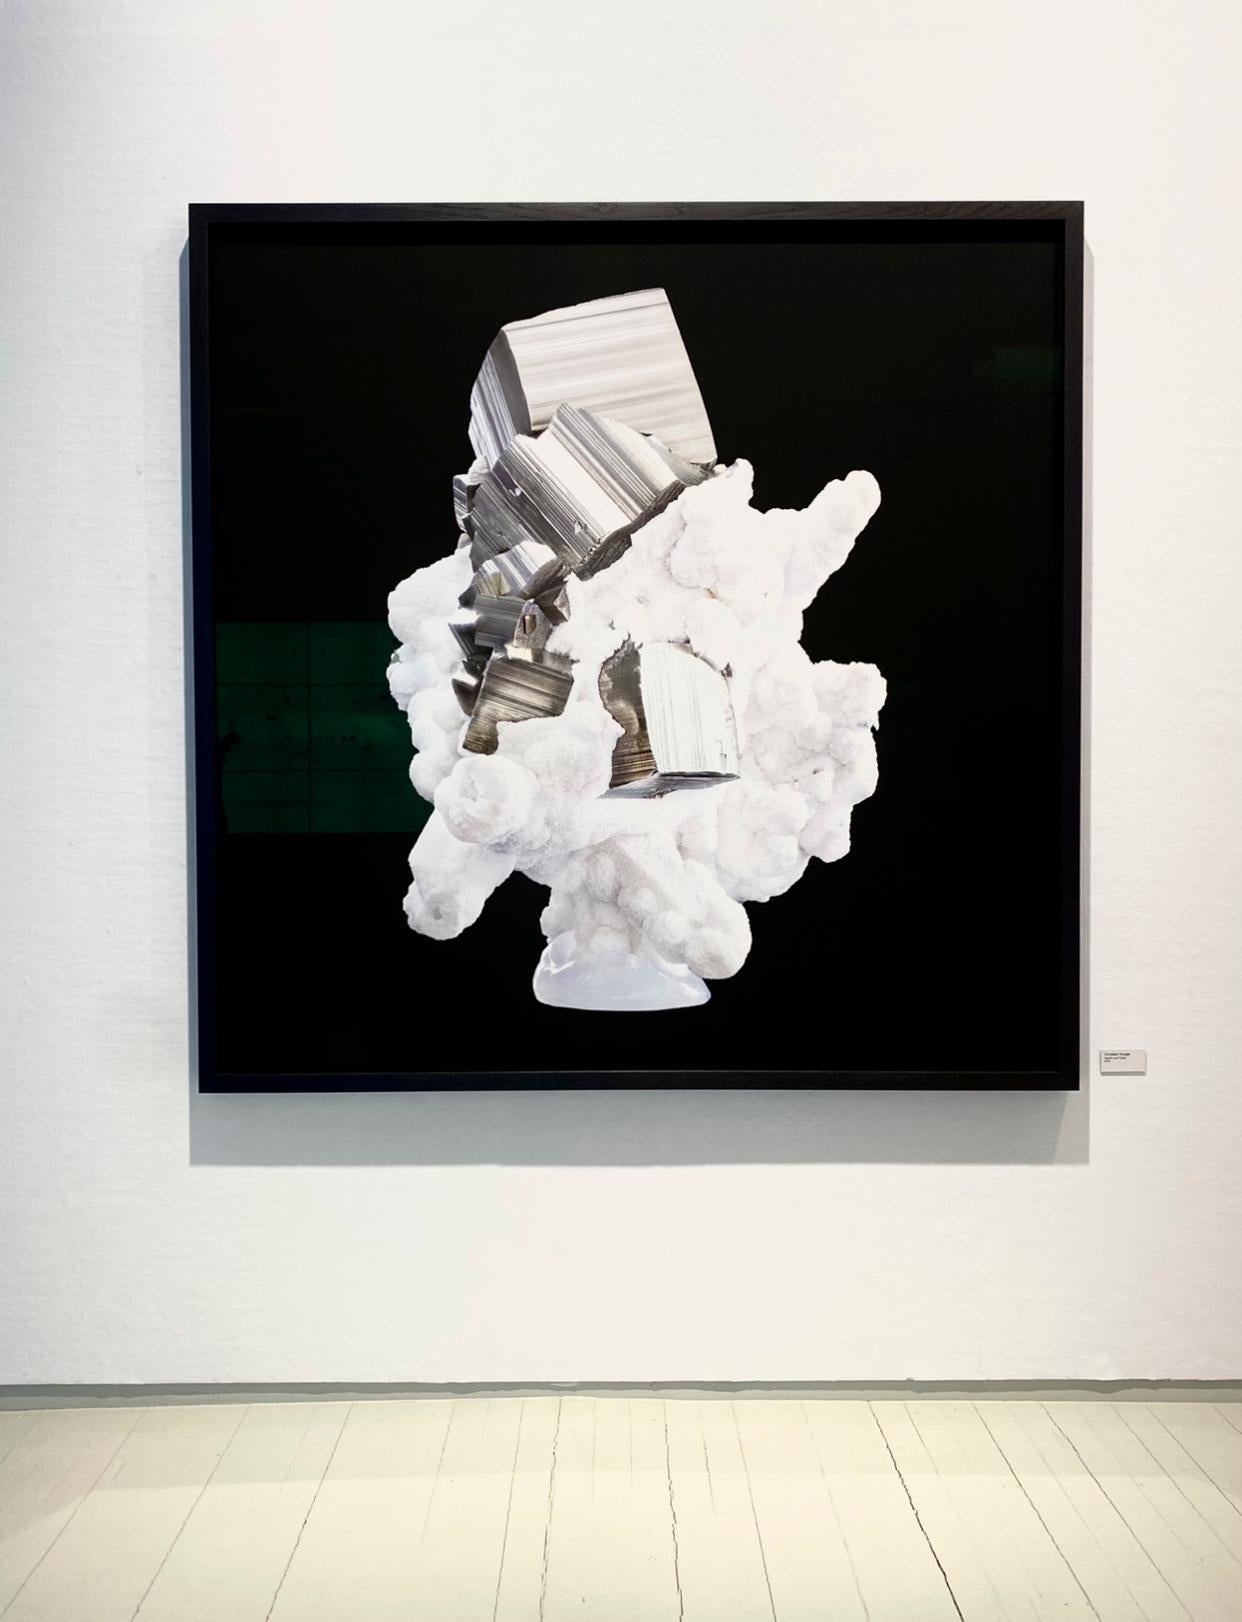 `Quarts and Pyrite`, Oslo. Edition of 3 - `In;Human Nature`- mineral rock nature - Photograph by Christian Houge